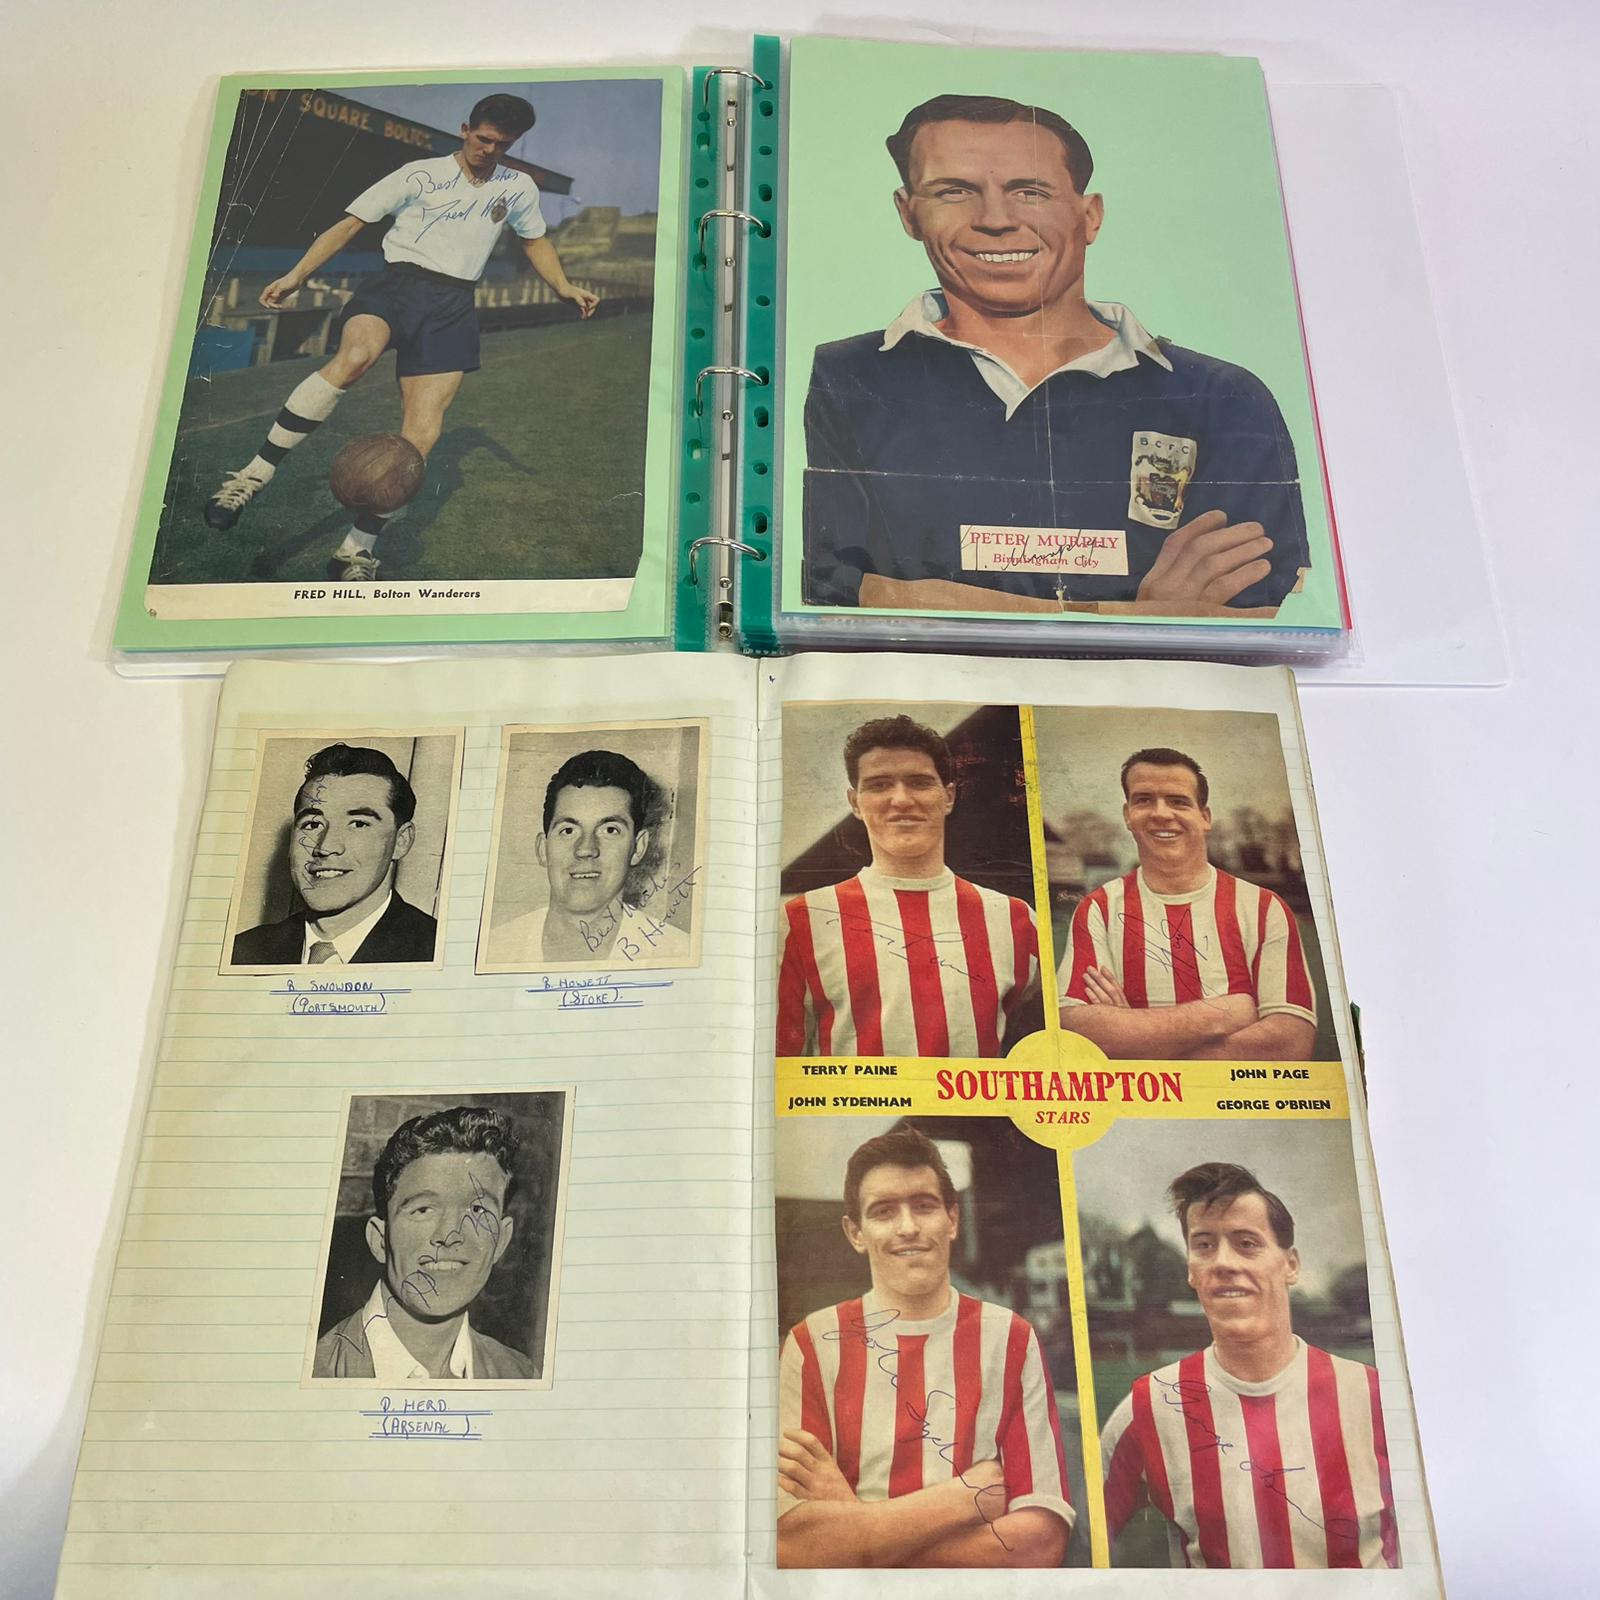 A 1960's football album containing hundreds of signed autographs from players on cuttings. Players